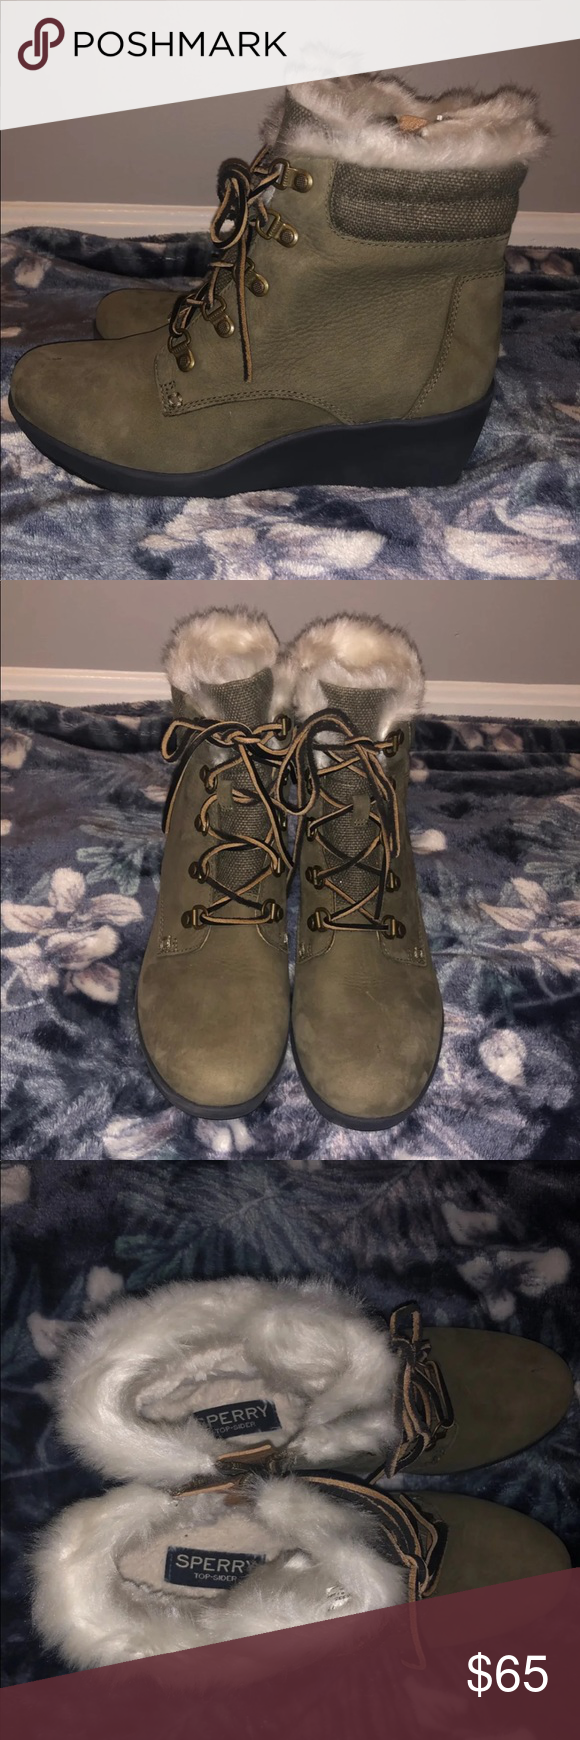 Sperry Top-Sider Boots Women’s Size 7 Sperry Top-Sider Boots Women’s Size 7,…